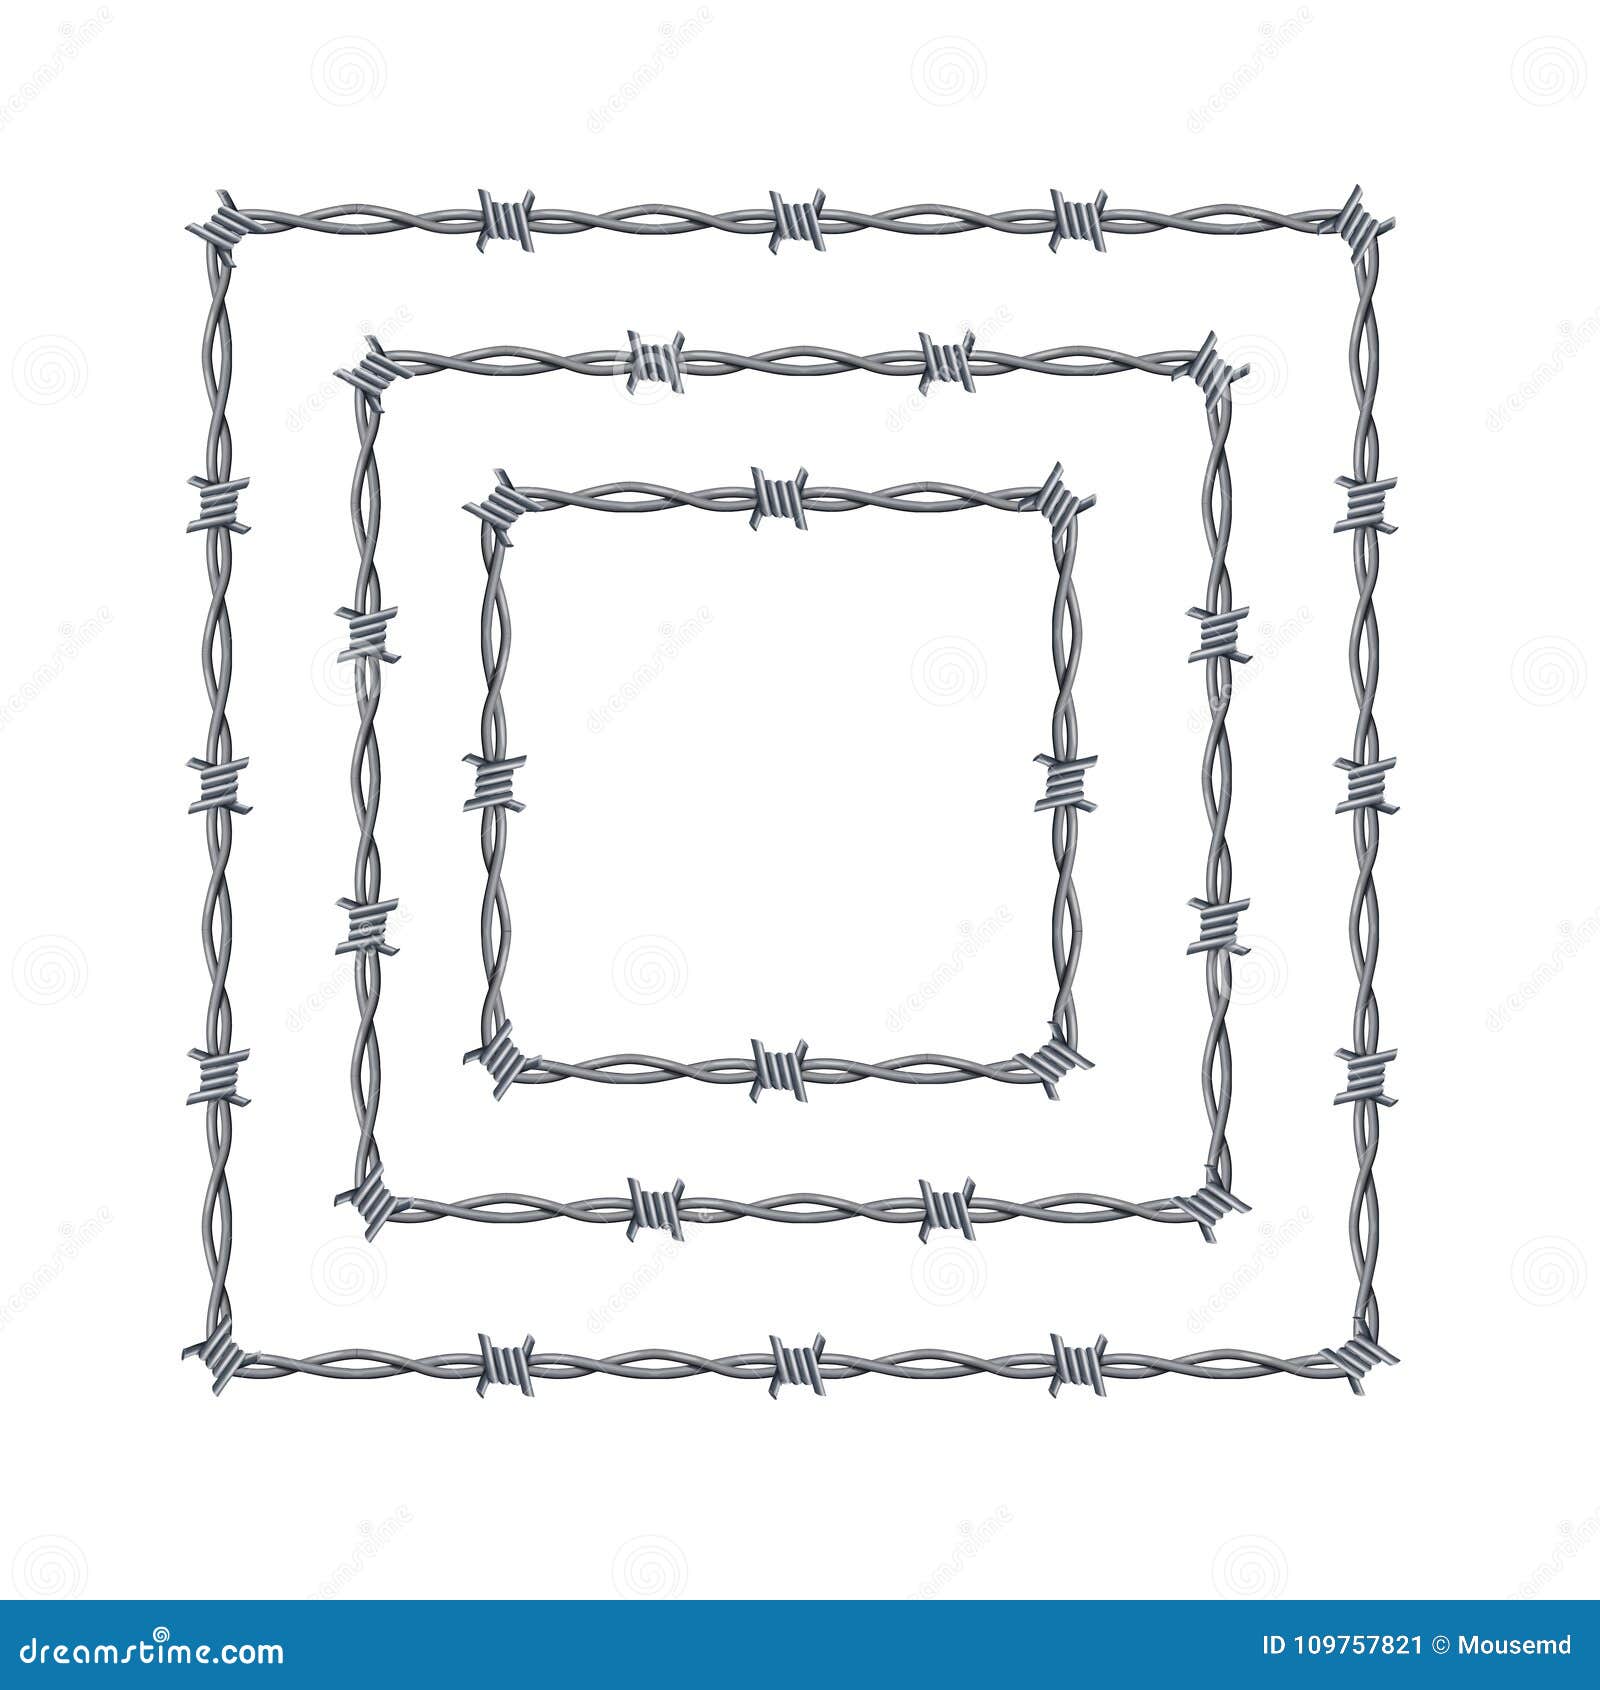 Download Realistic 3d Detailed Barbed Wire Frames Set. Vector Stock ...